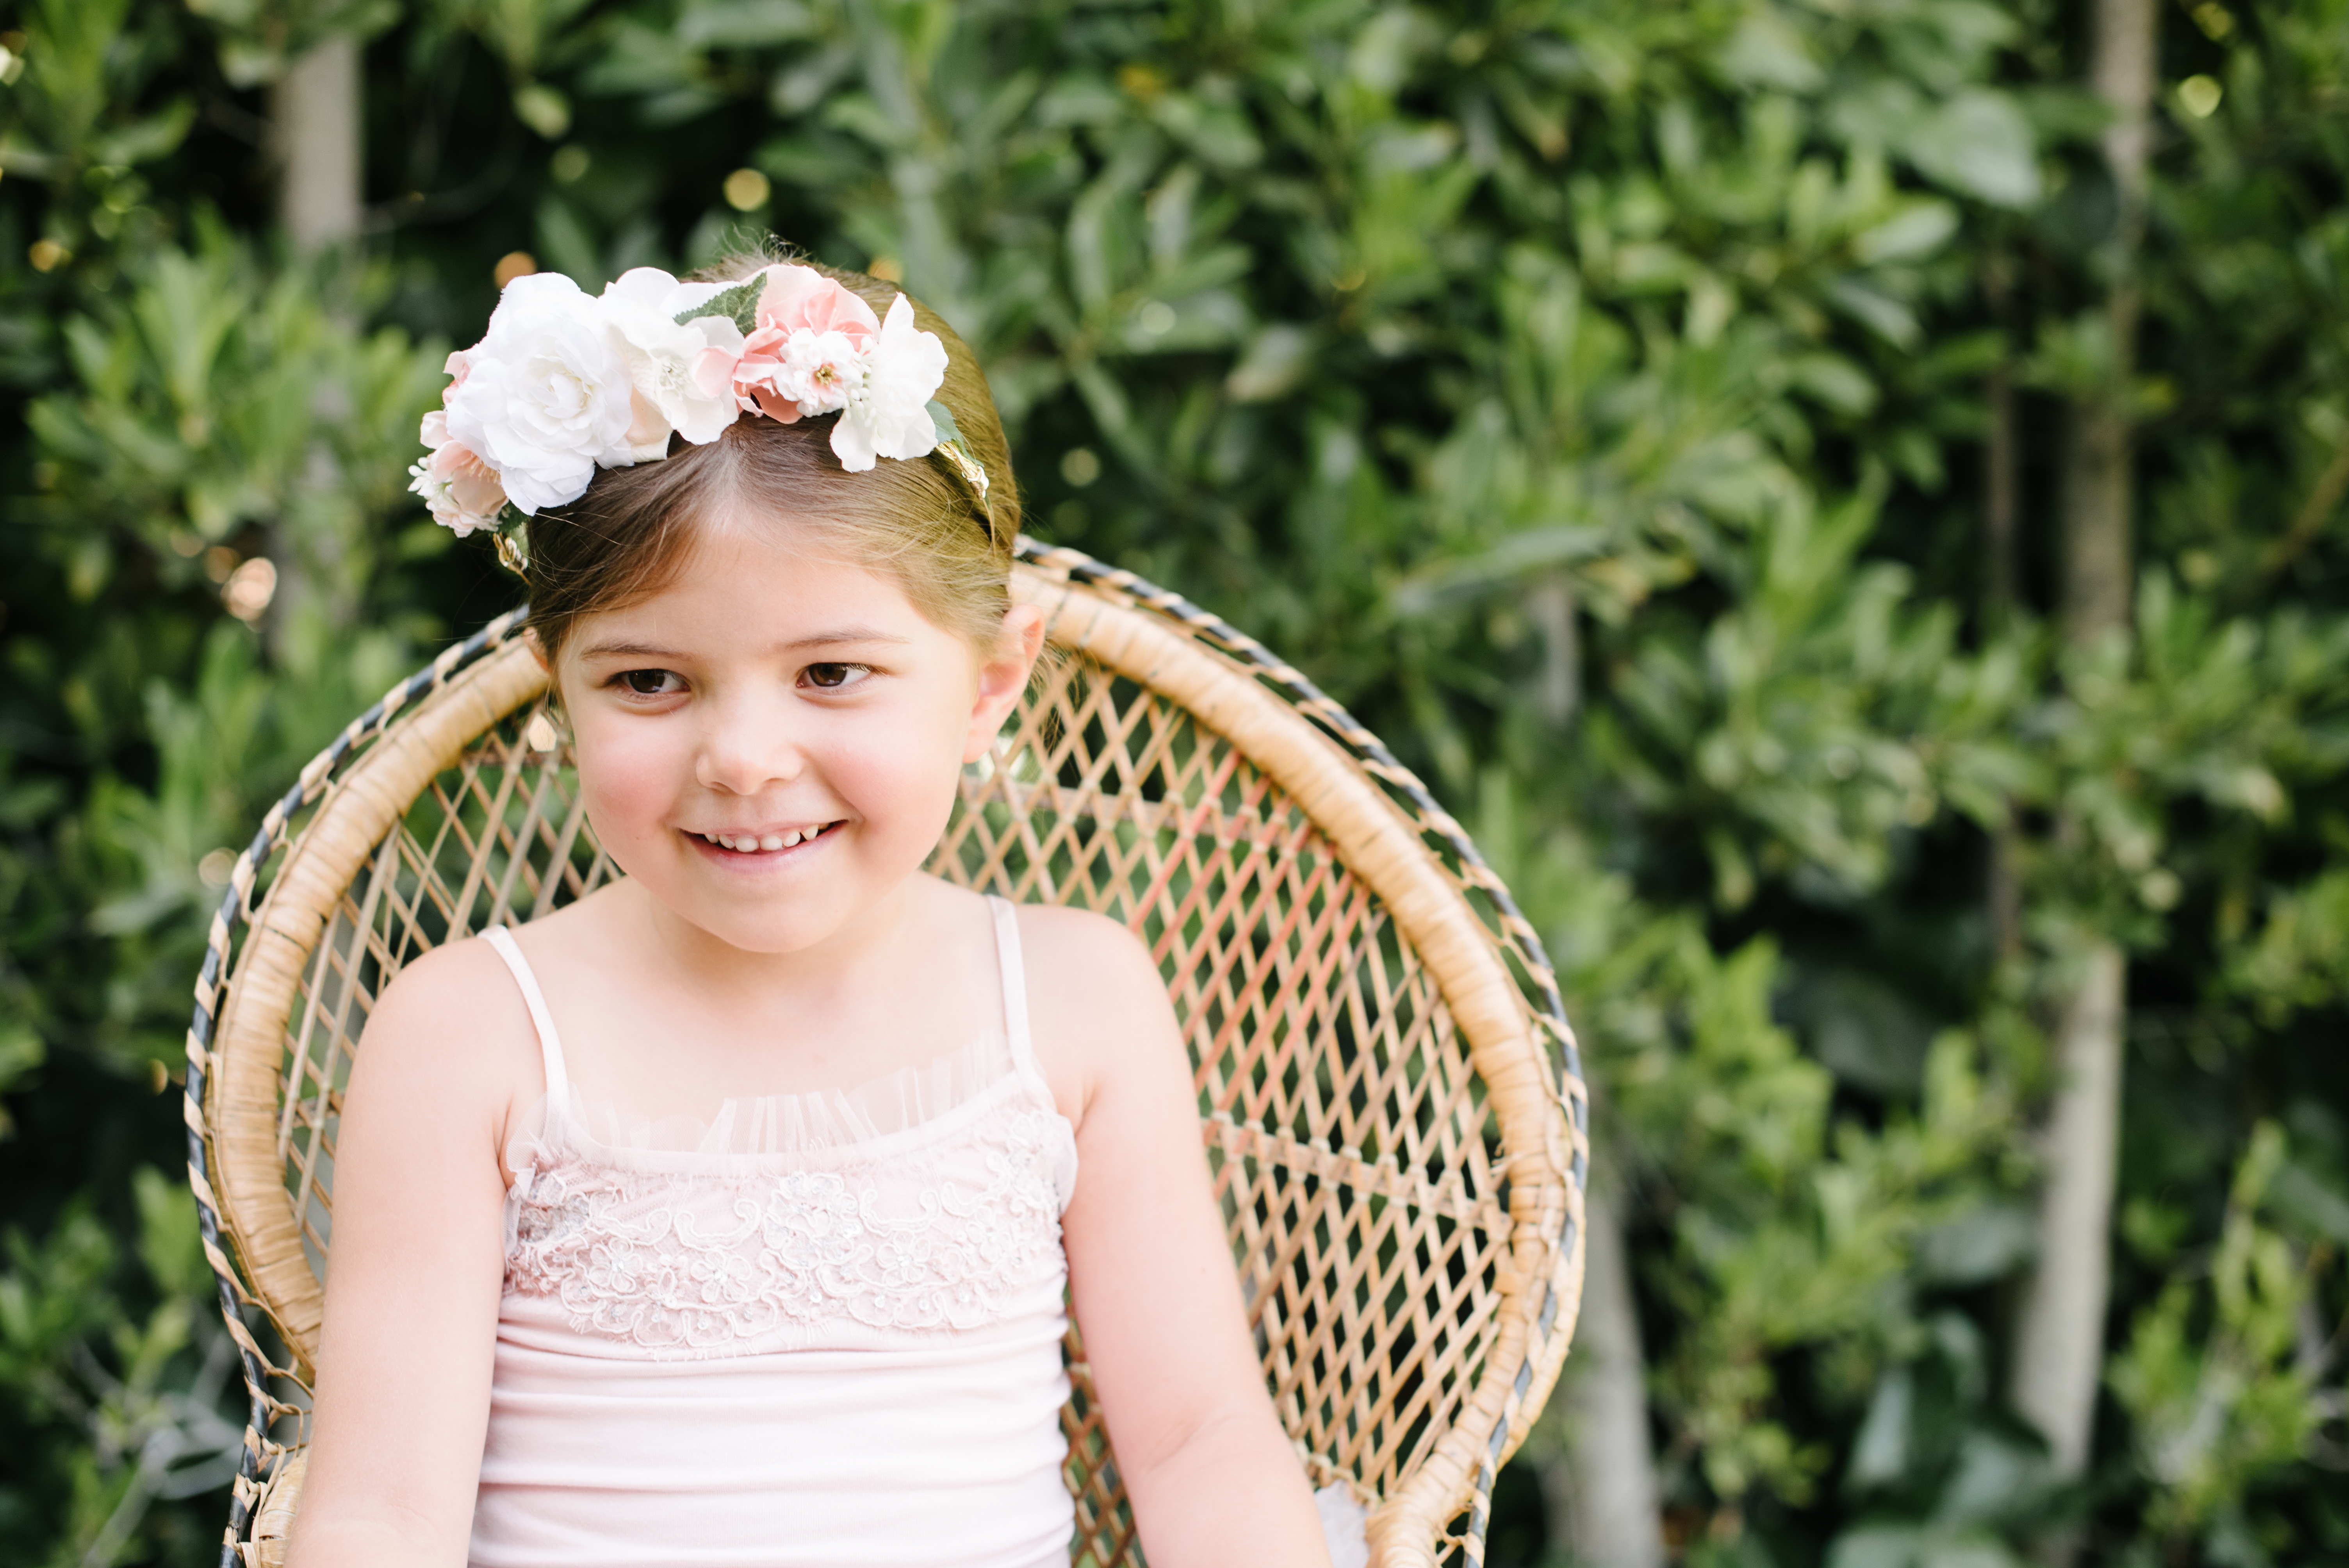 A Ballerina 5th Birthday Party that’s Pretty & Pink